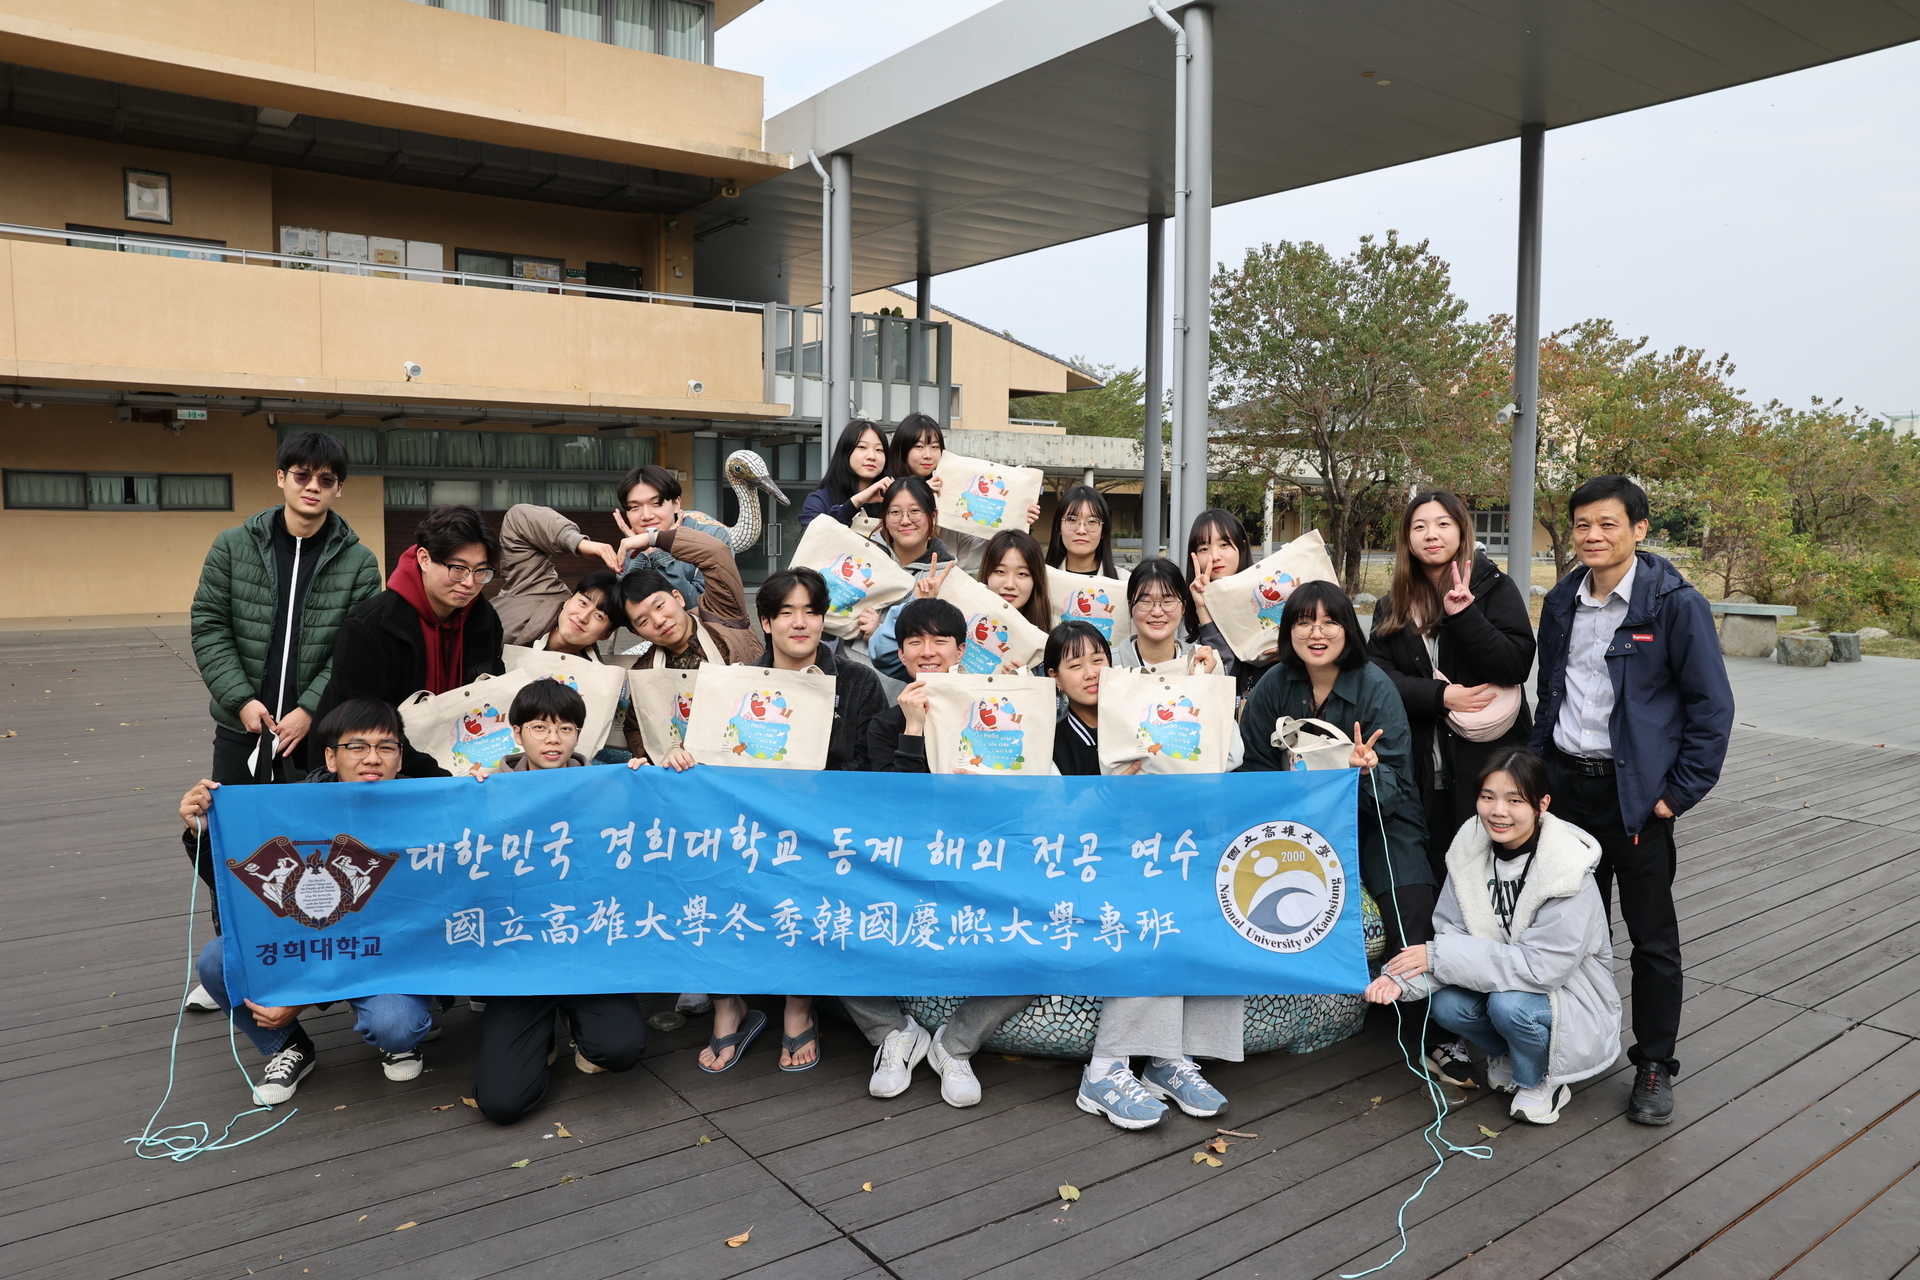 Department of East Asian Languages and Literature organized a cultural study program for students and faculty from Kyung Hee University. 002